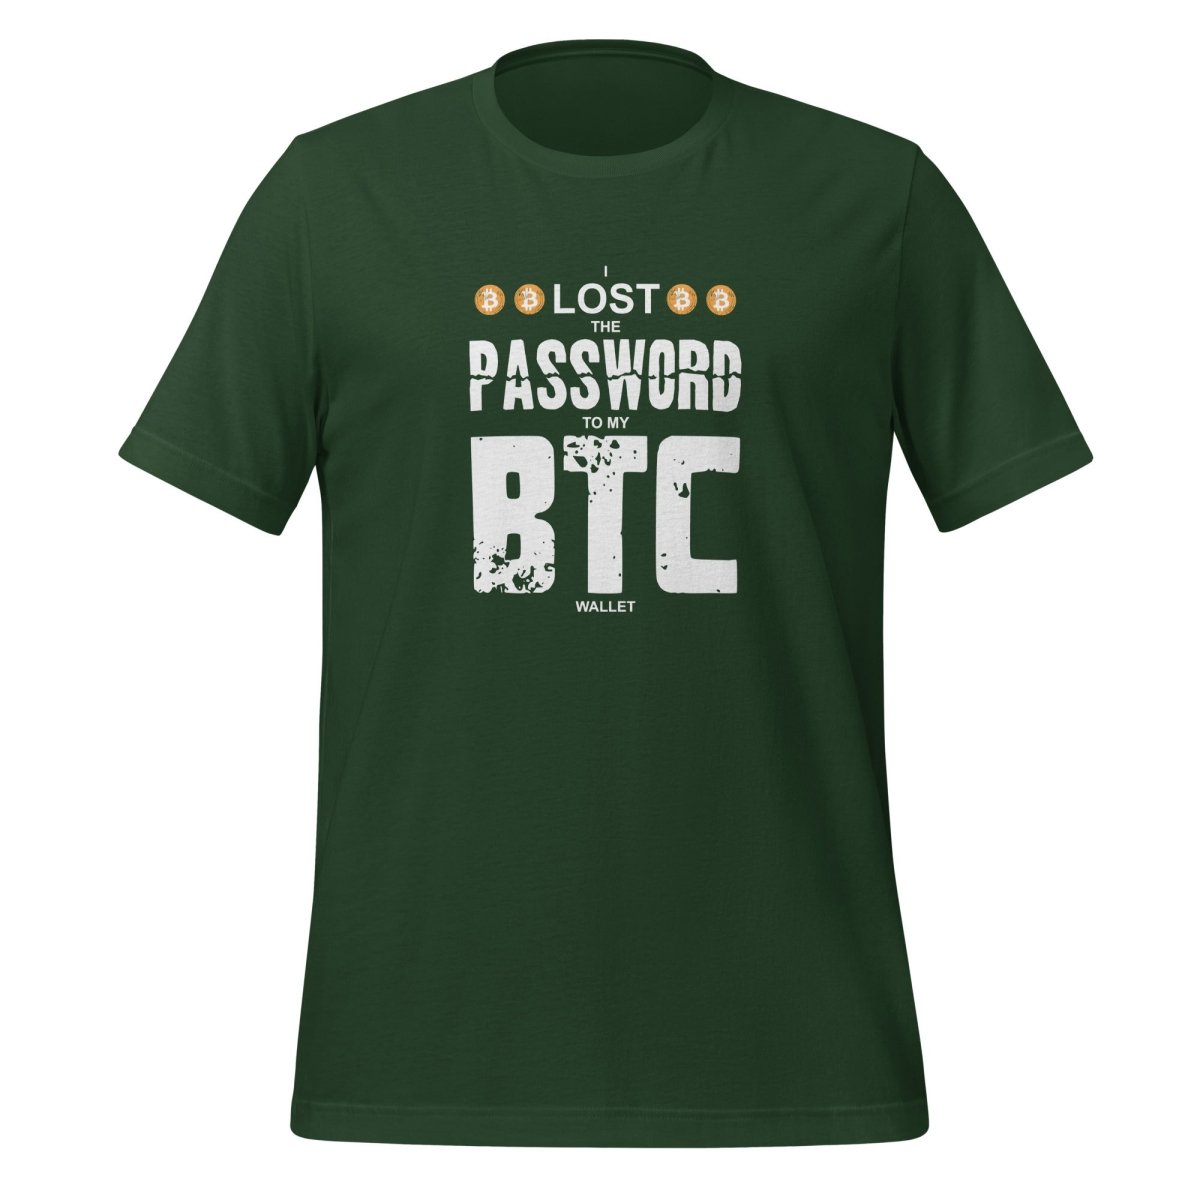 I Lost the Password to my Bitcoin Wallet T - Shirt (unisex) - Forest - AI Store